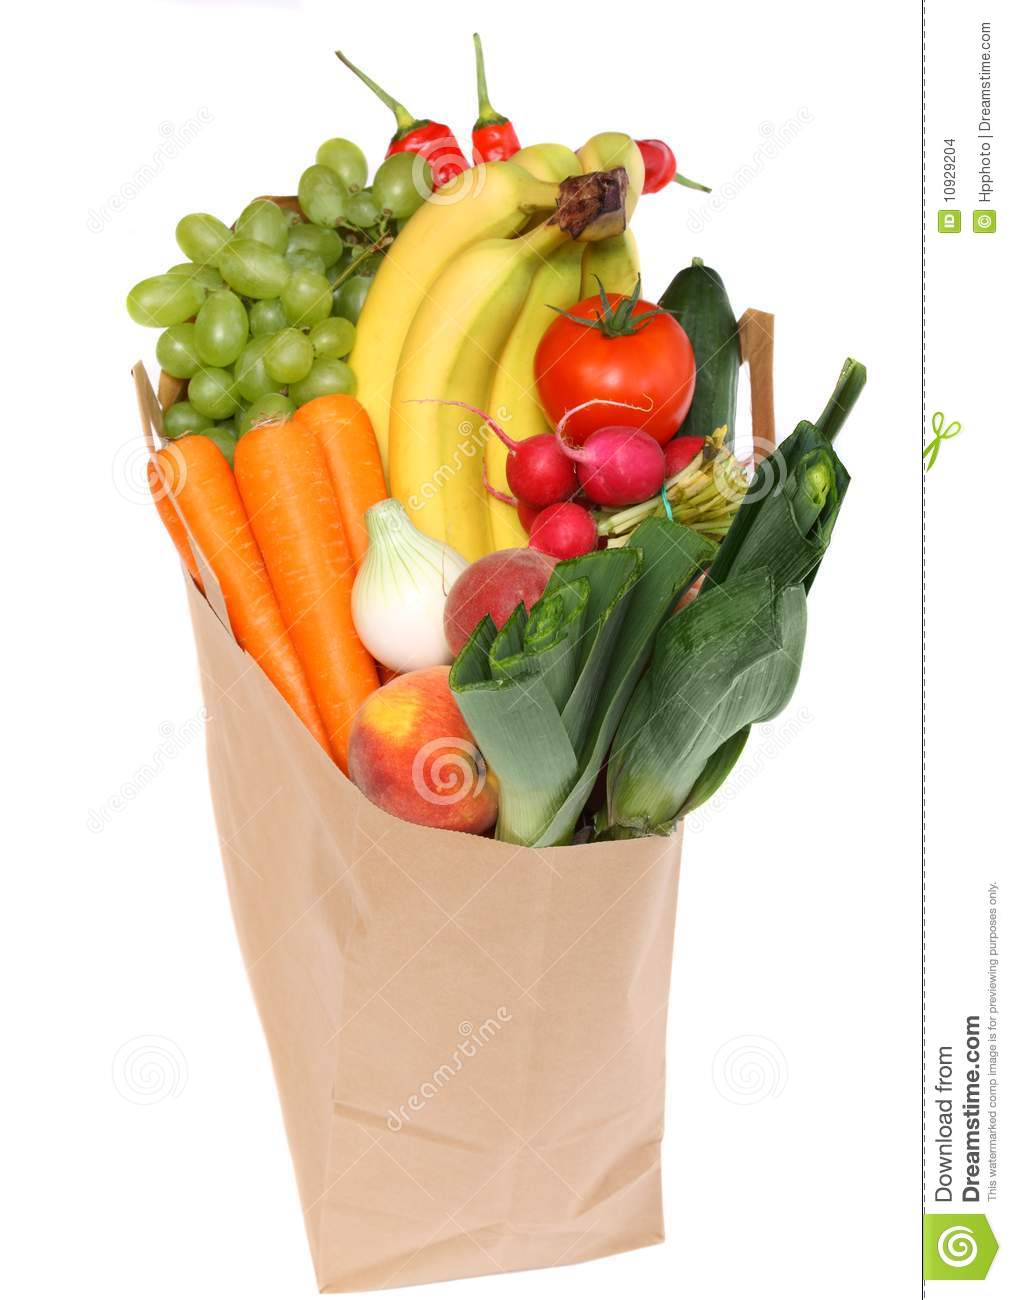 Grocery Bag Full Of Healthy Fruits Stock Images   Image  10929204